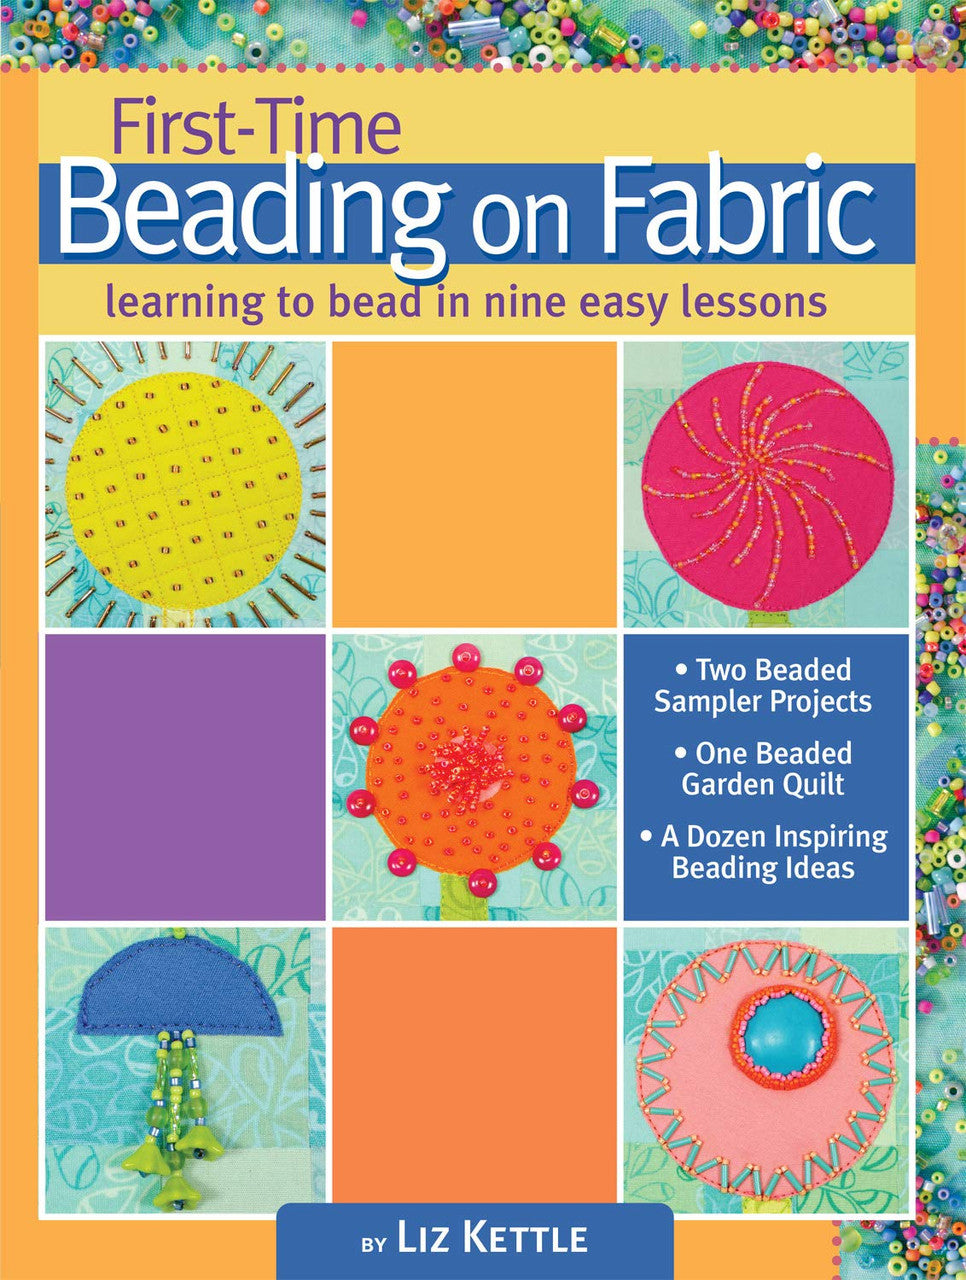 First-Time Beading on Fabric Book by Liz Kettle